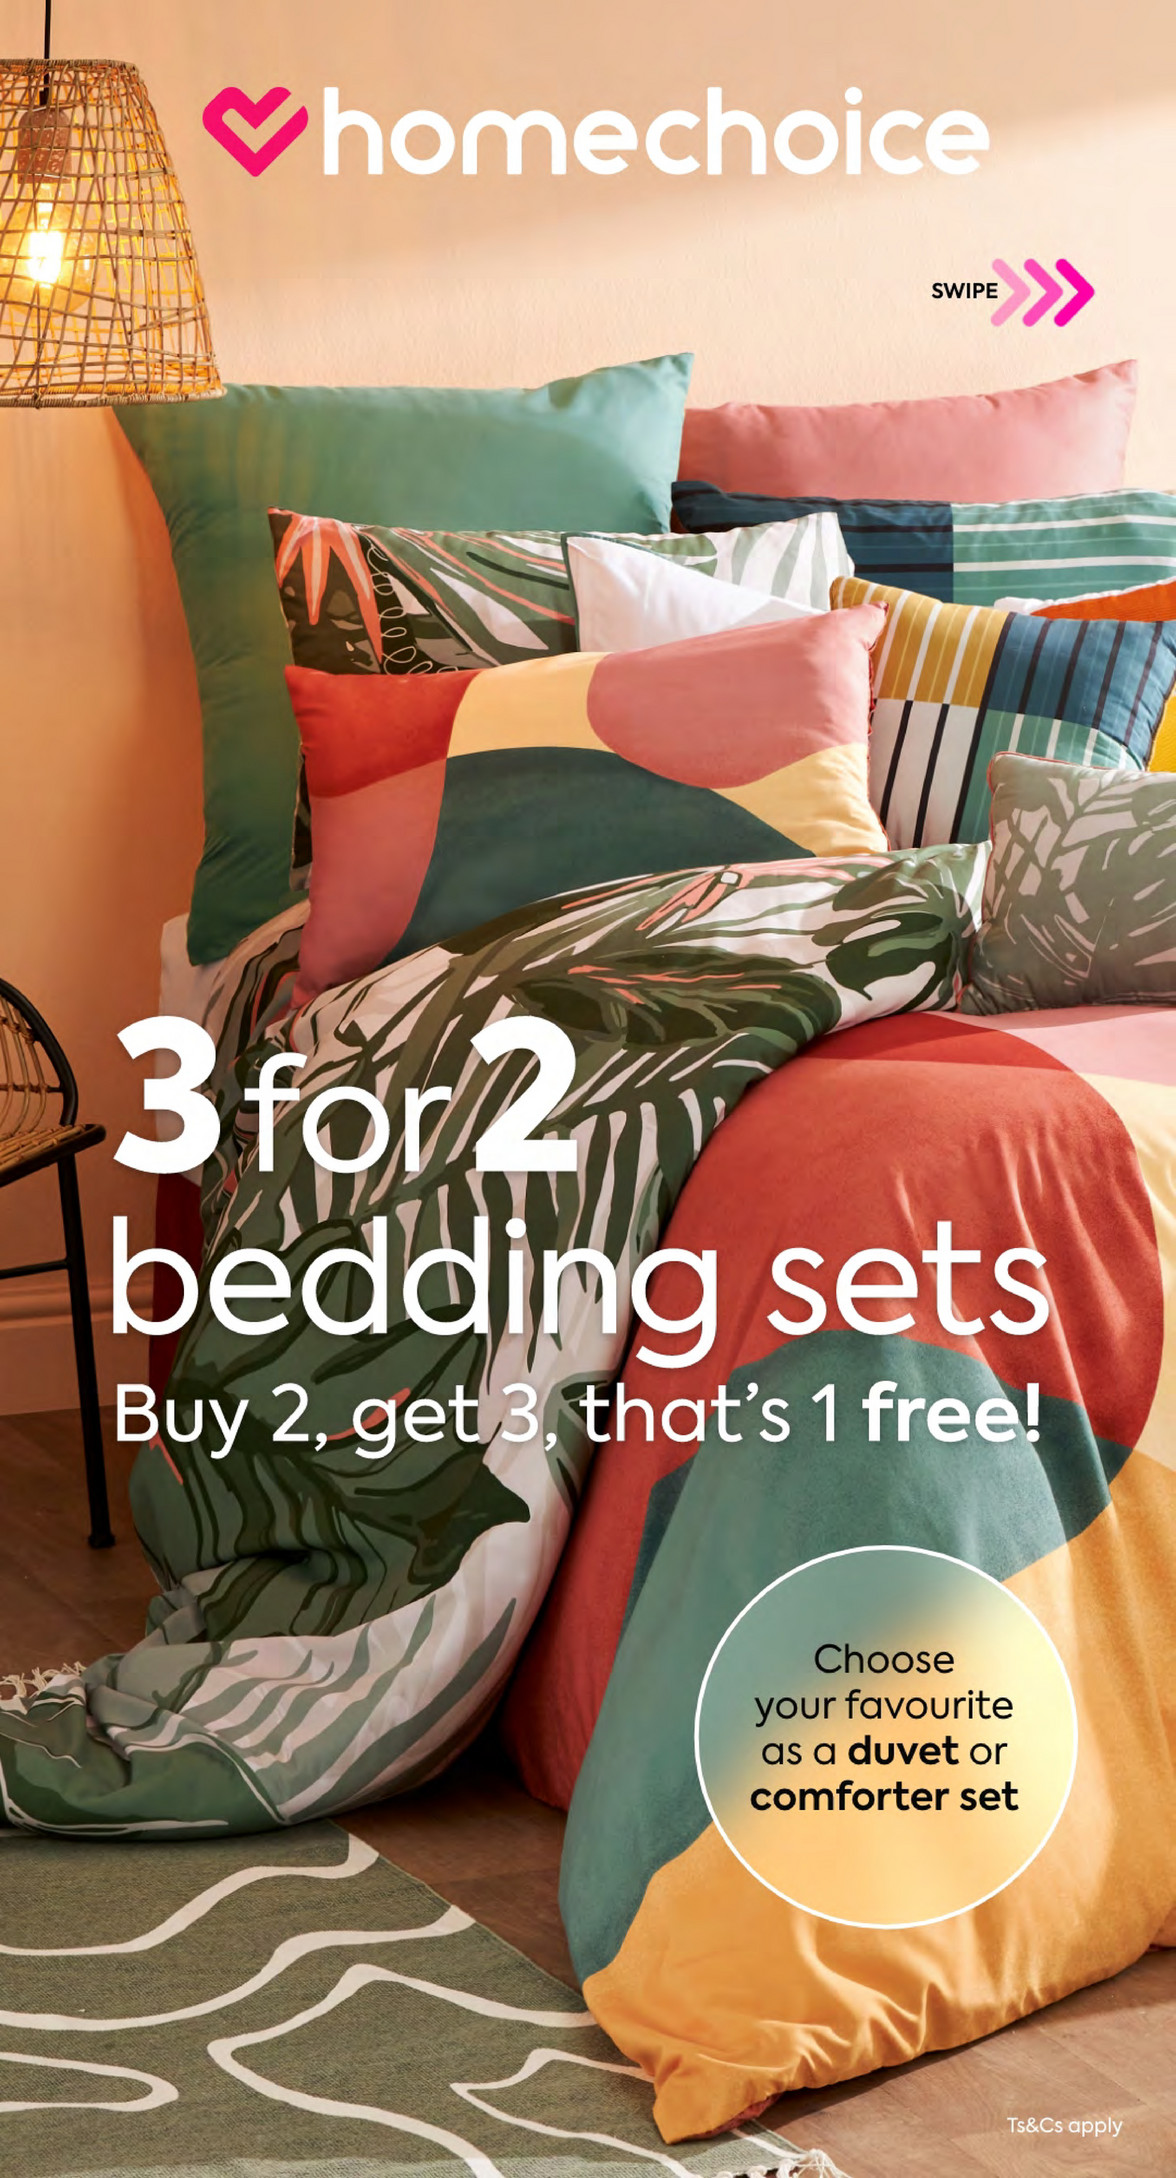 homechoice - August - 2023 Digital Catalogue 3 for 2 Bedding - Page 9